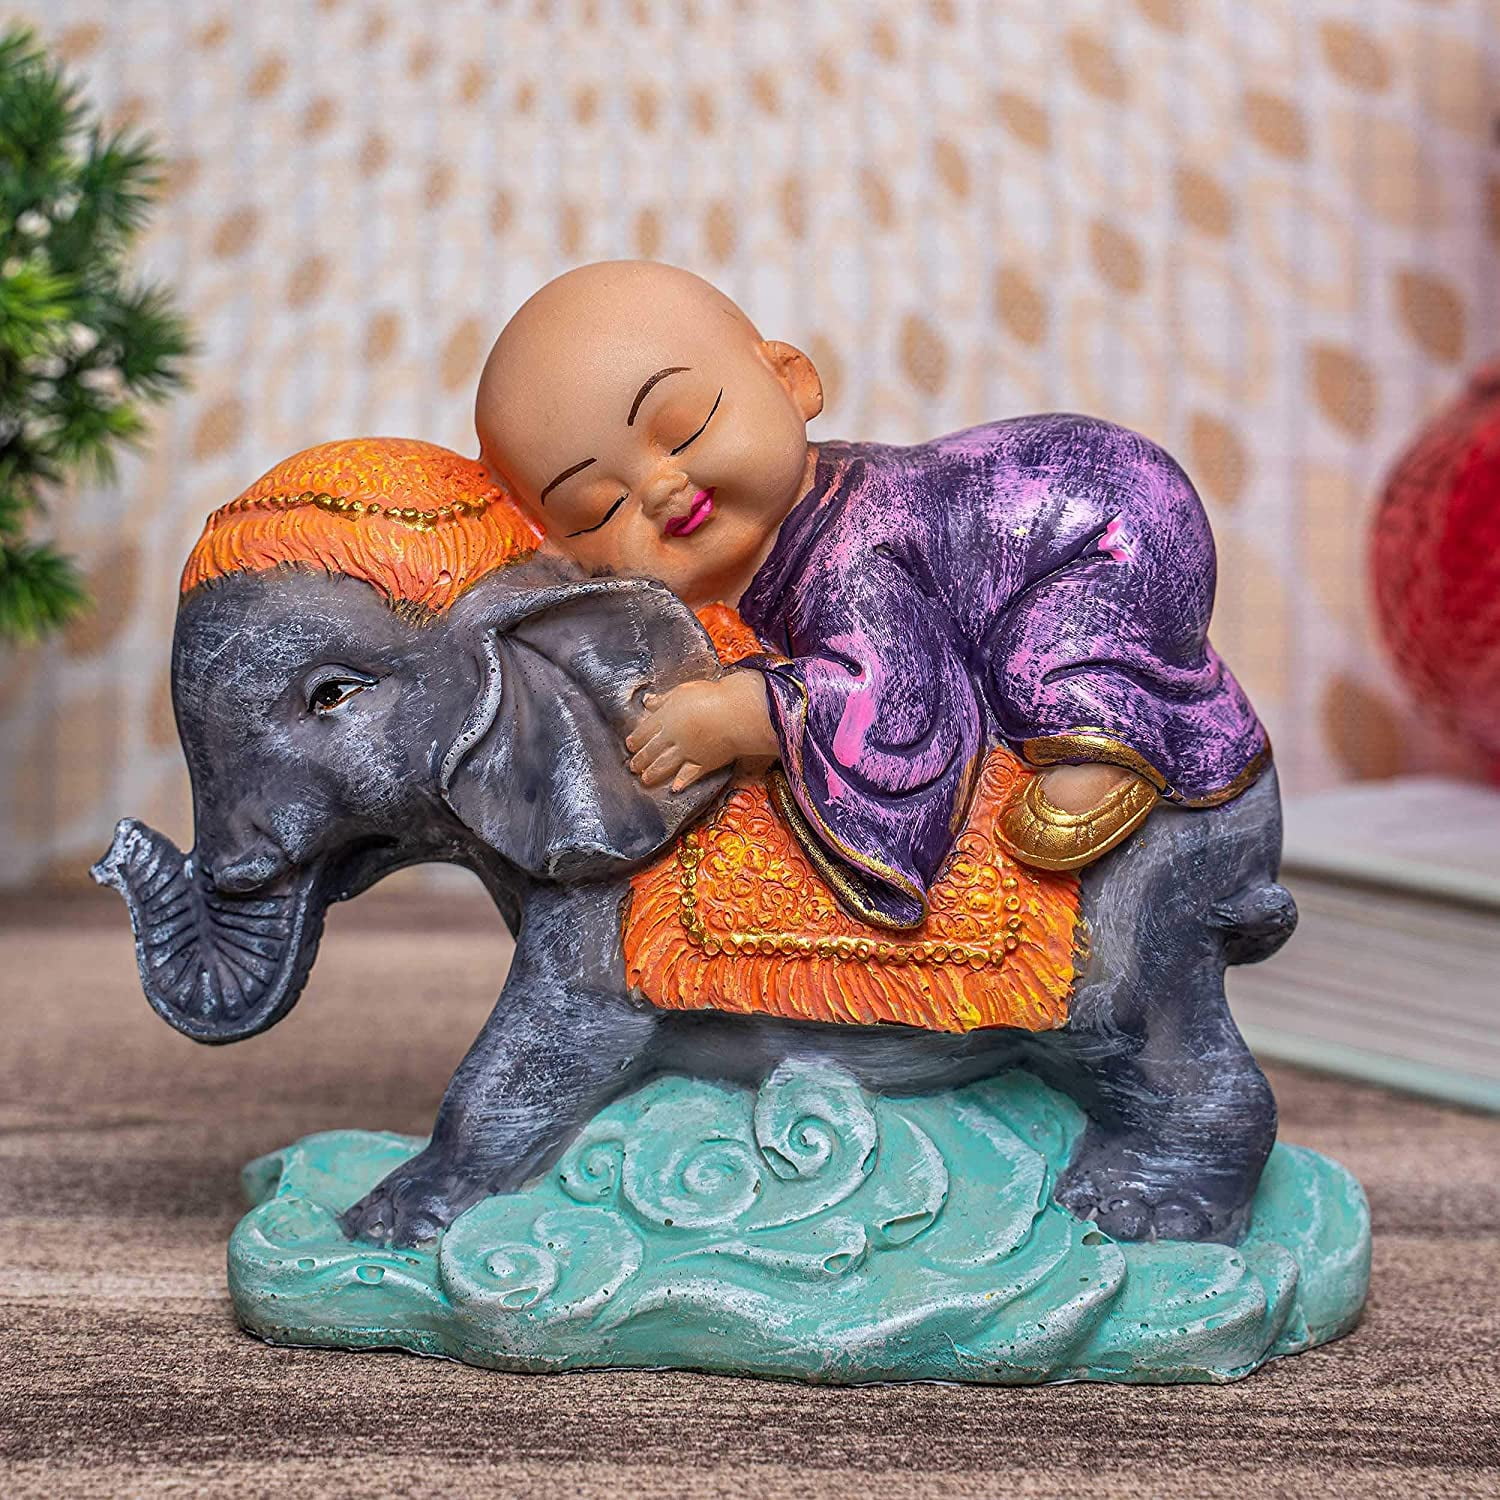 Valentines Day Gifts for Him Her Valentines Day Decorations for The Home 16 cm X 13 cm TIED RIBBONS Elephant Abstract Handmade Indian Figurine for Home décor Wall Shelf Living Room Decoration